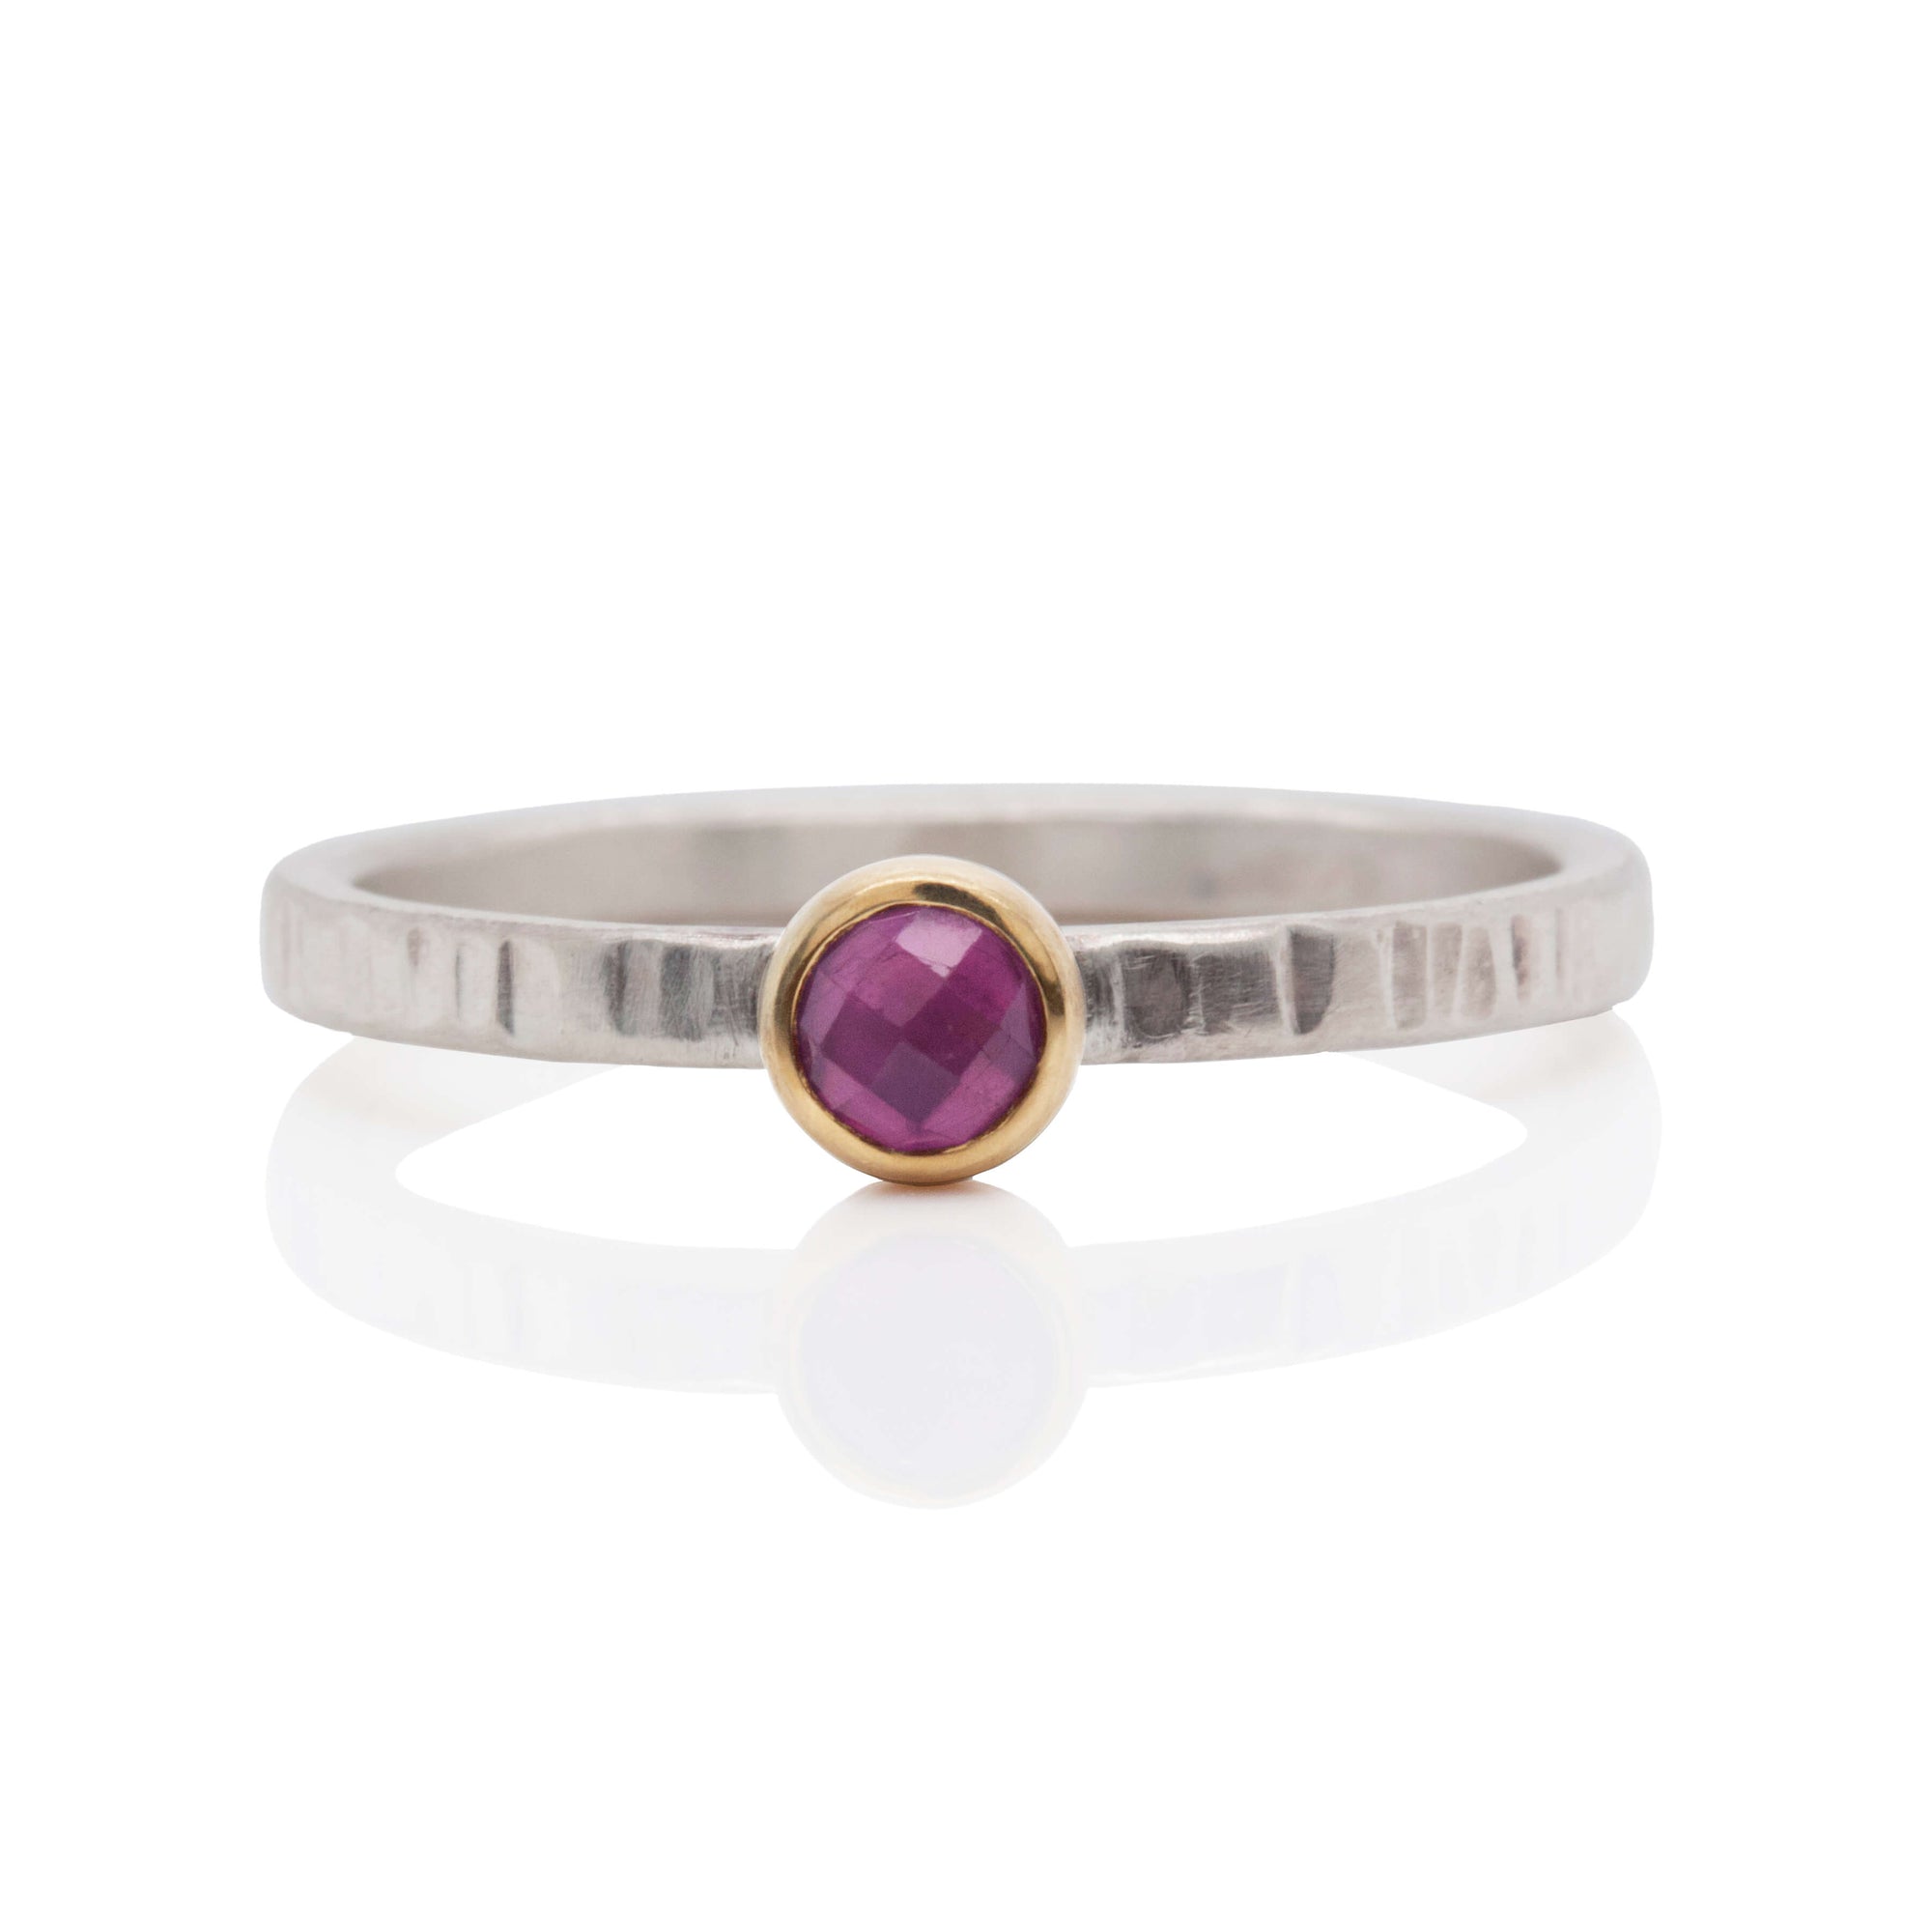 Rose Cut Purple Sapphire Ring in Yellow Gold and Silver